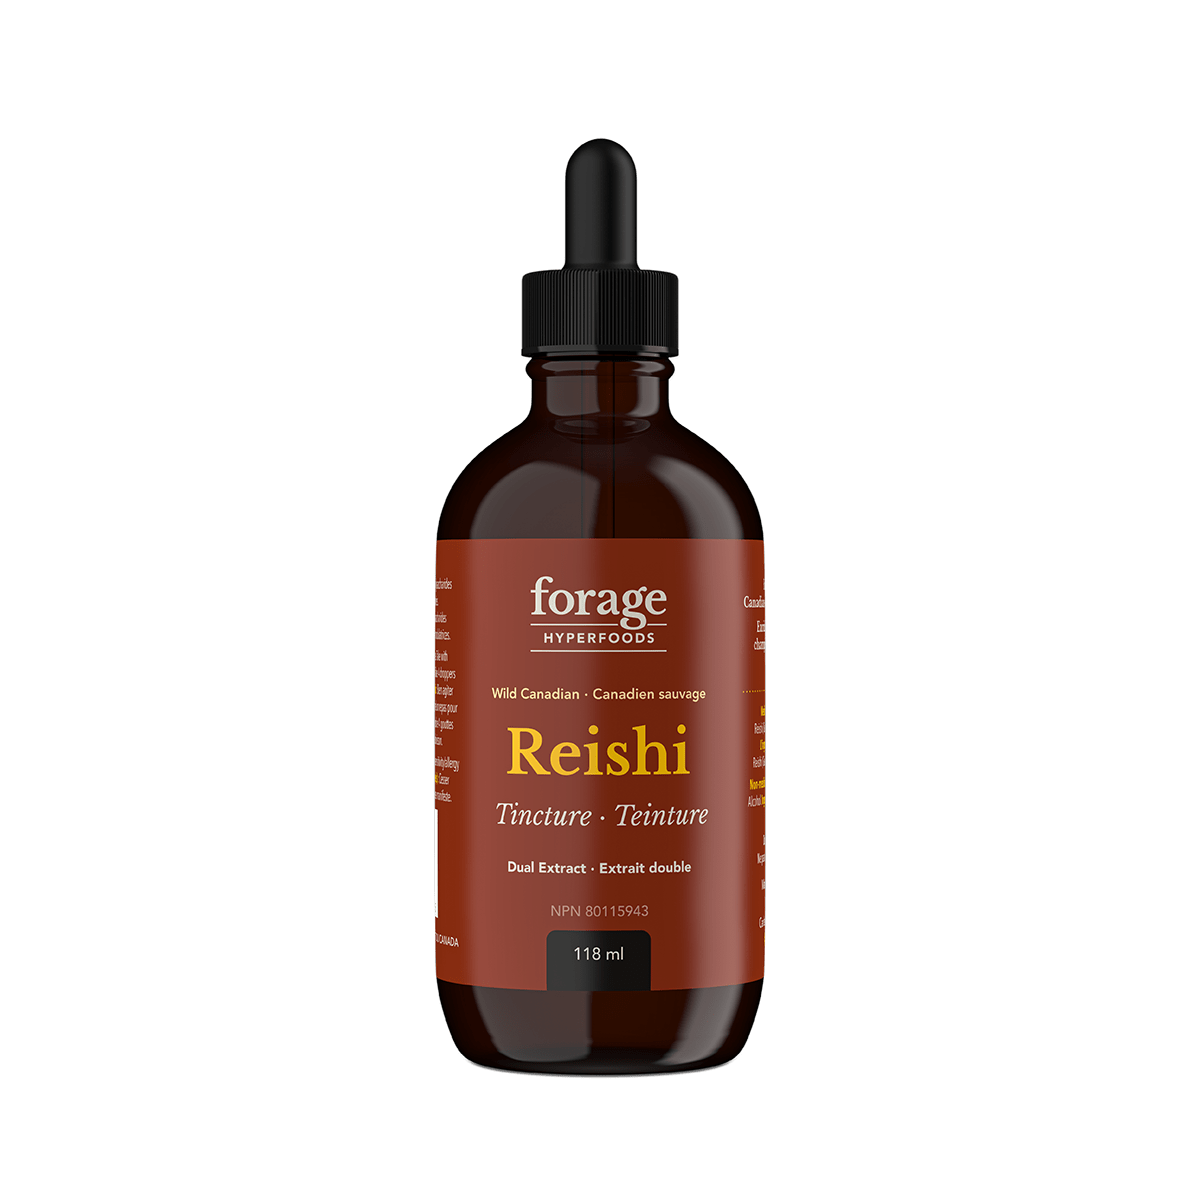 A dark glass bottle of Forage Hyperfoods Reishi tincture in the Original  format.